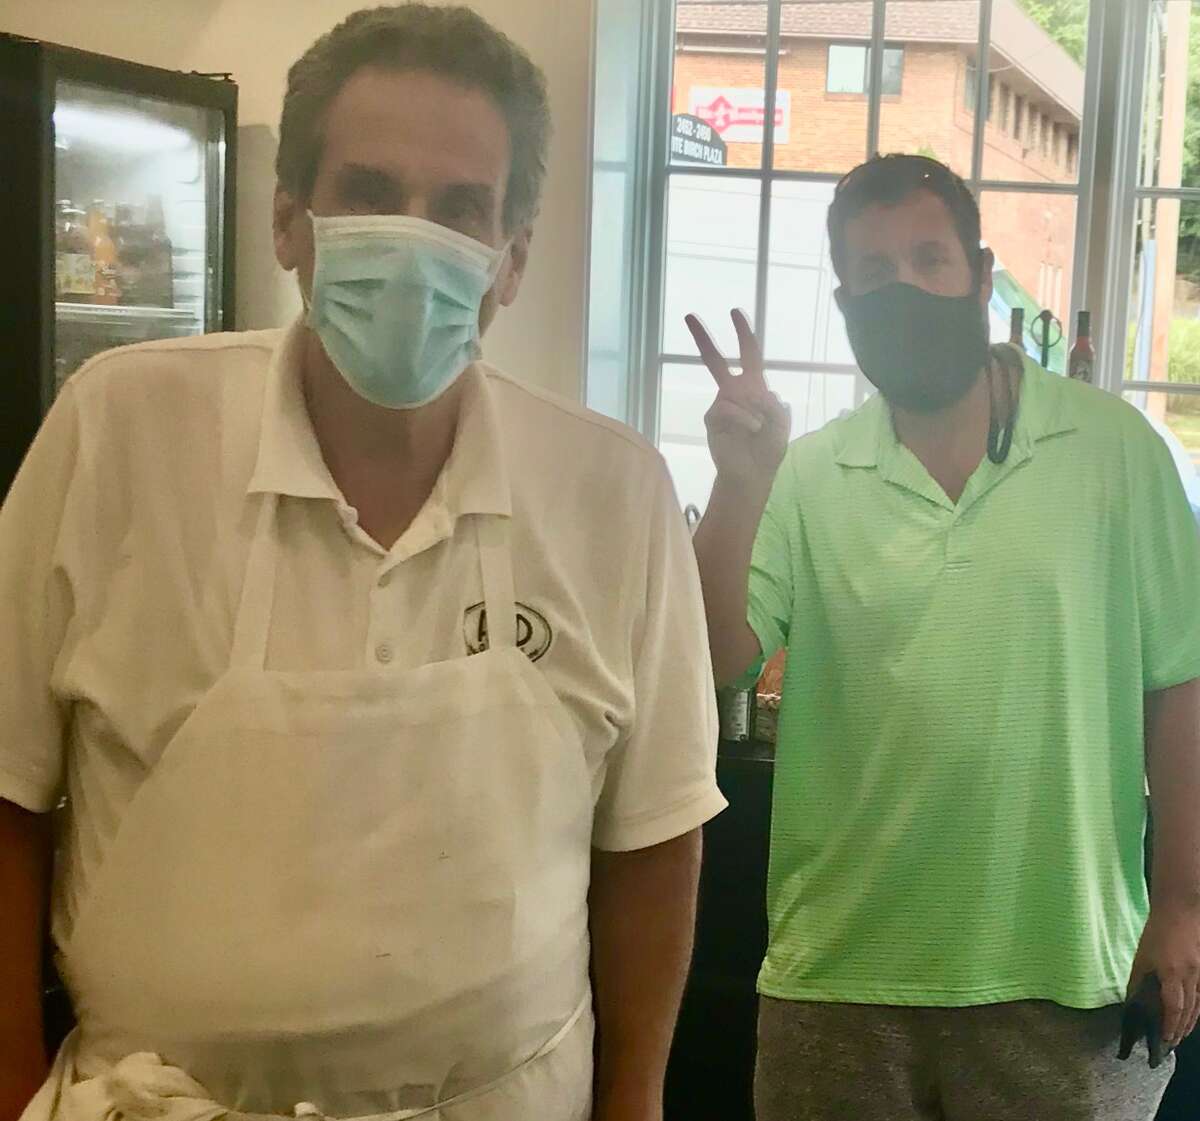 Adam Sandler and owner Fred Kaskowitz at Fred 06825 in Fairfield to pick up food on Sept. 28, 2020. "By happenstance, he walked into the store," said Kaskowitz. "We recognized him and had a nice conversation and took a couple photos...When he opened up his mouth to talk, that's when we knew it was him. [His voice was] a dead ringer." Kaskowitz said Sandler picked up his food, used the restroom and was on his way.  